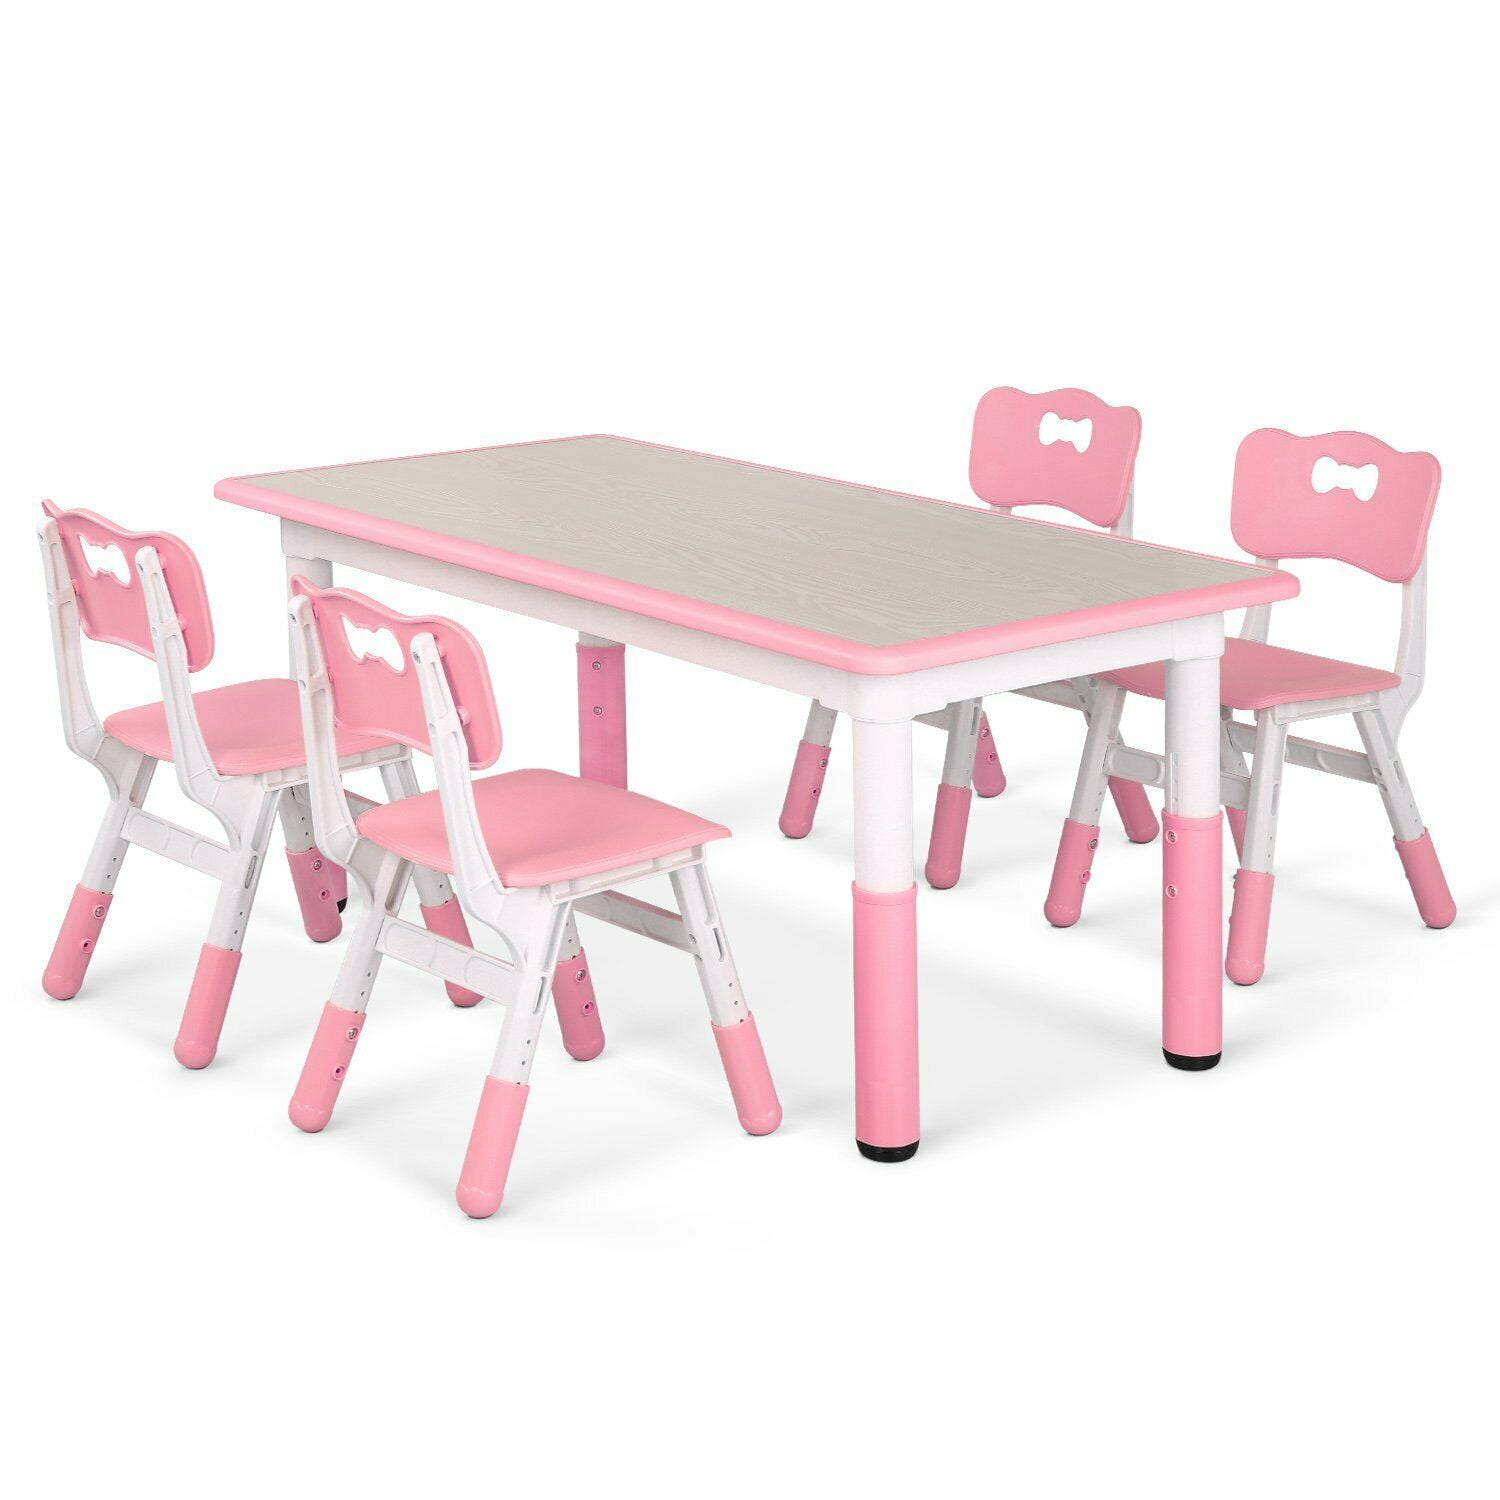 Pirecart 5-Piece Kids Table and 4 Chairs Children Activity Table for ...